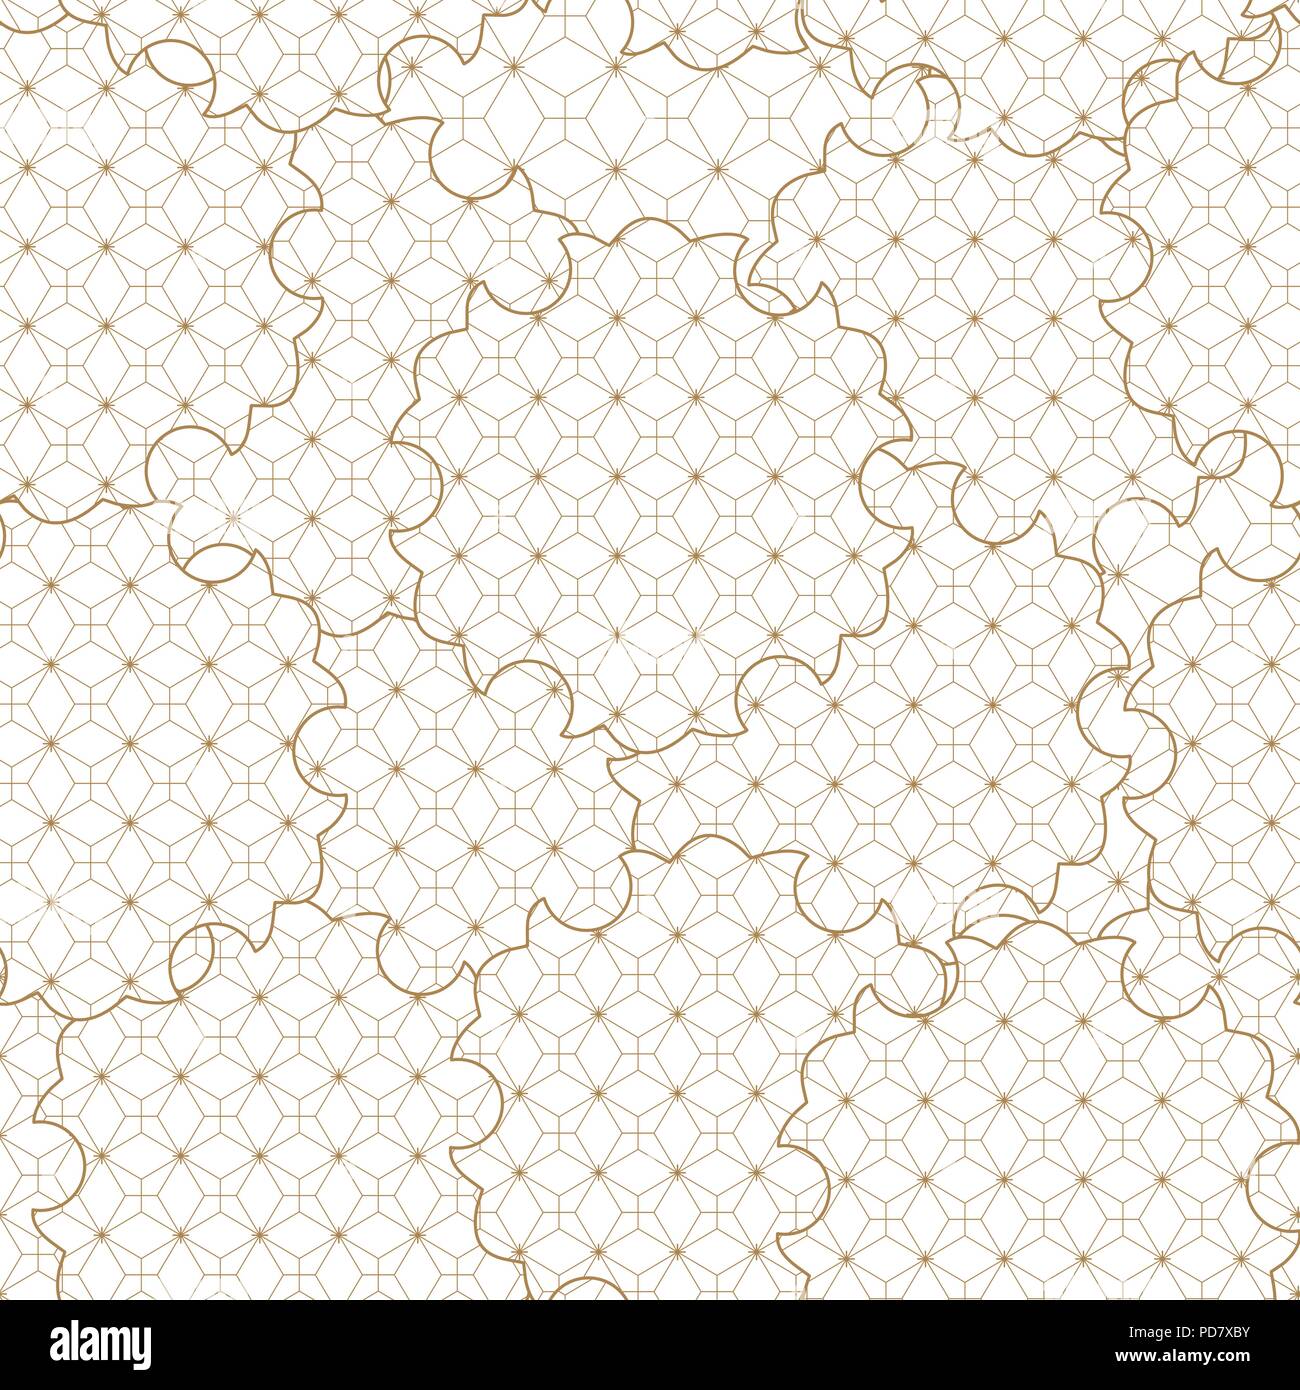 Japanese pattern vector. Gold geometric background. Stock Vector